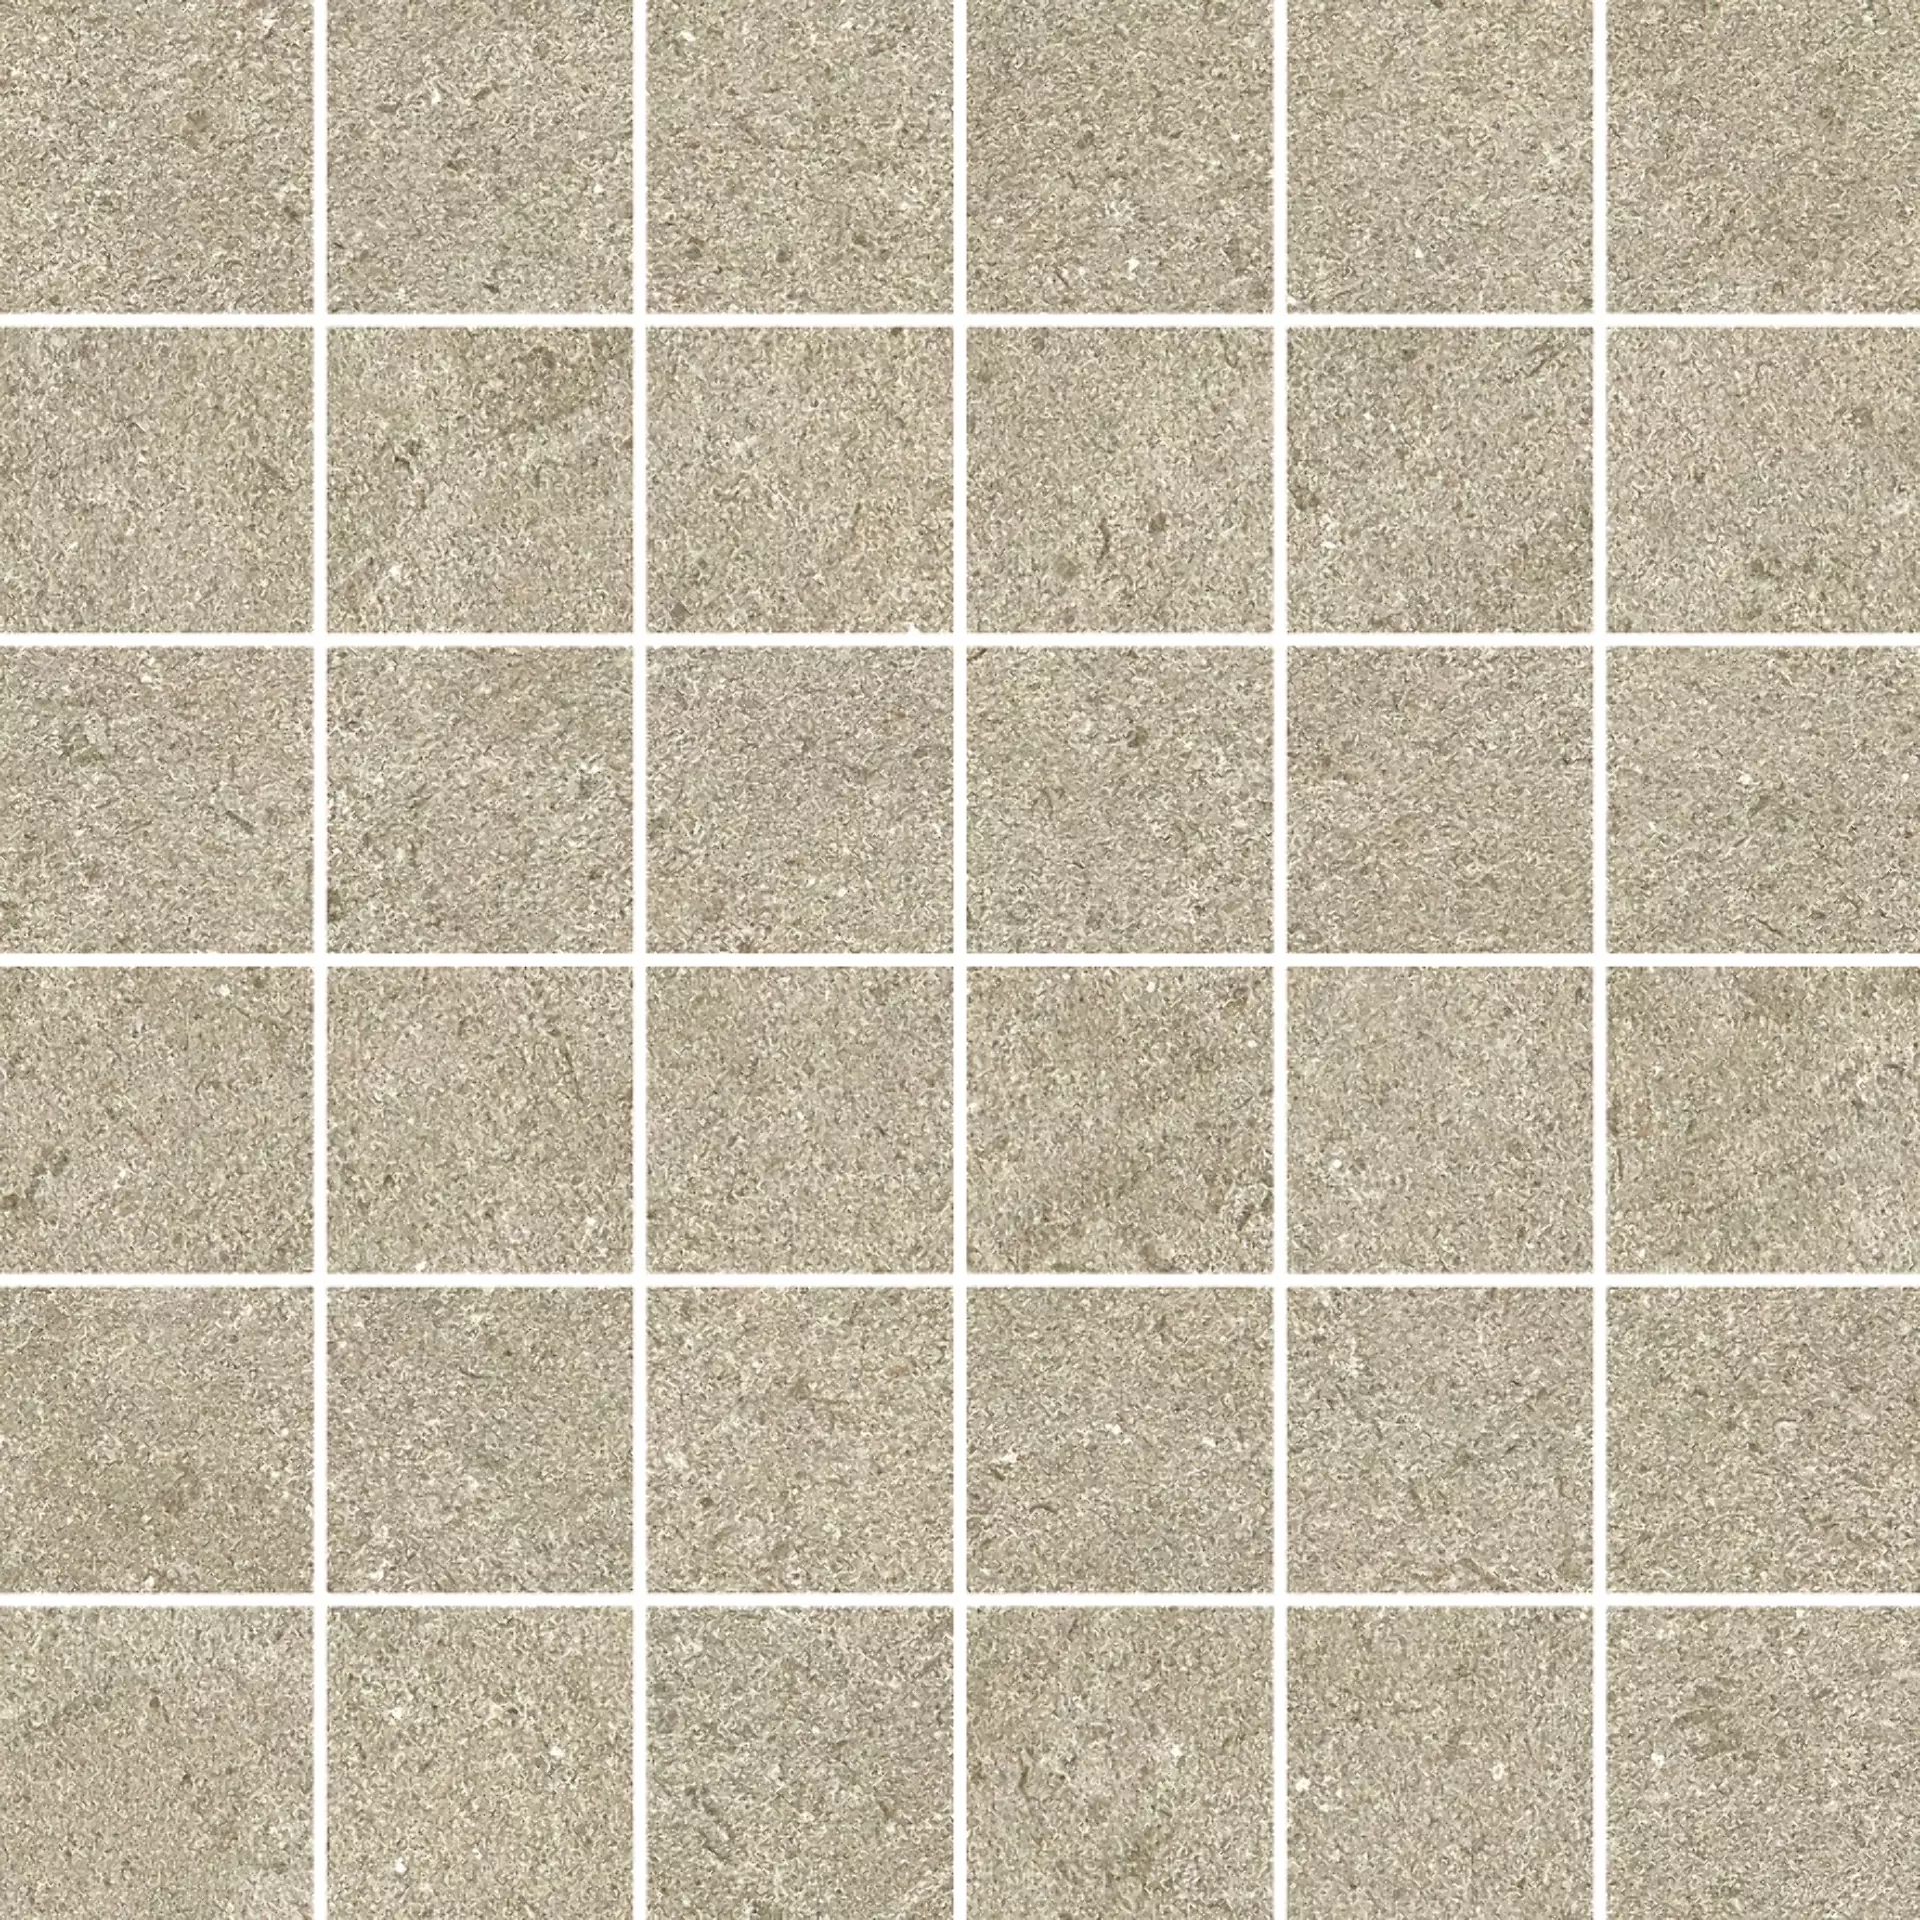 Margres Hybrid Light Grey Touch Mosaic 5x5 B25M33HB3T 30x30cm rectified 10,5mm